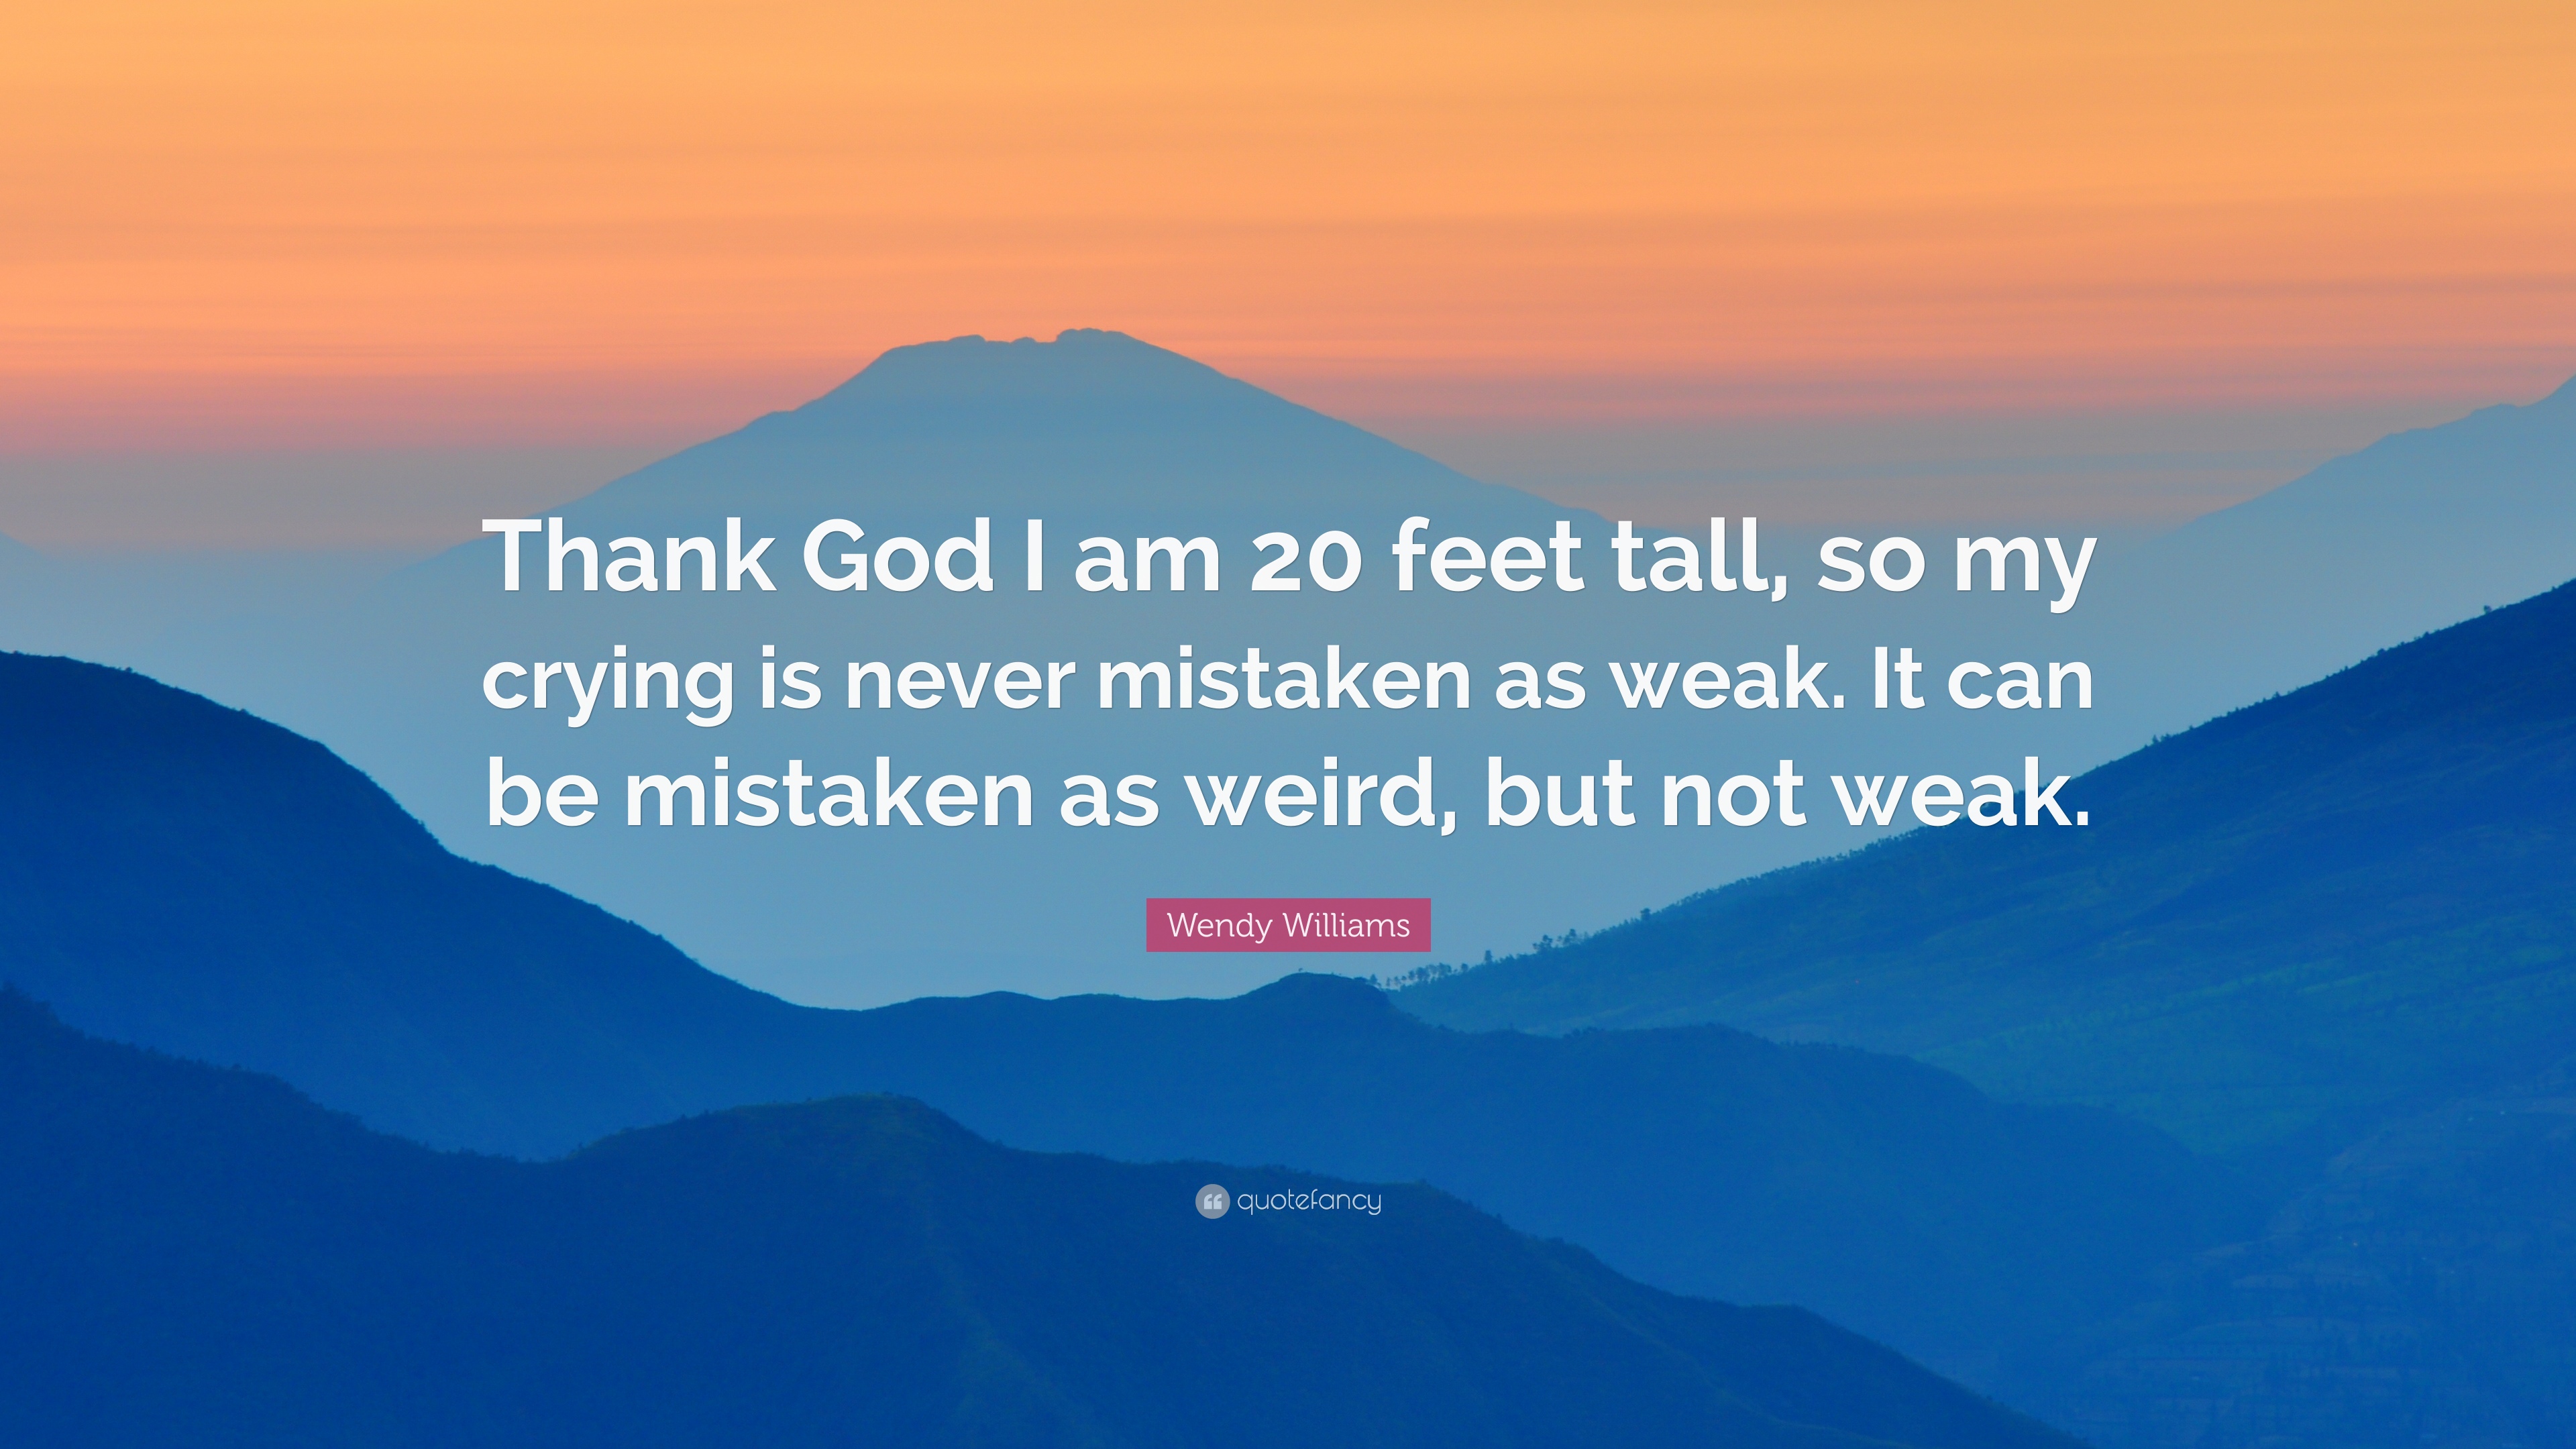 Wendy Williams Quote: “Thank God I am 20 feet tall, so my crying is